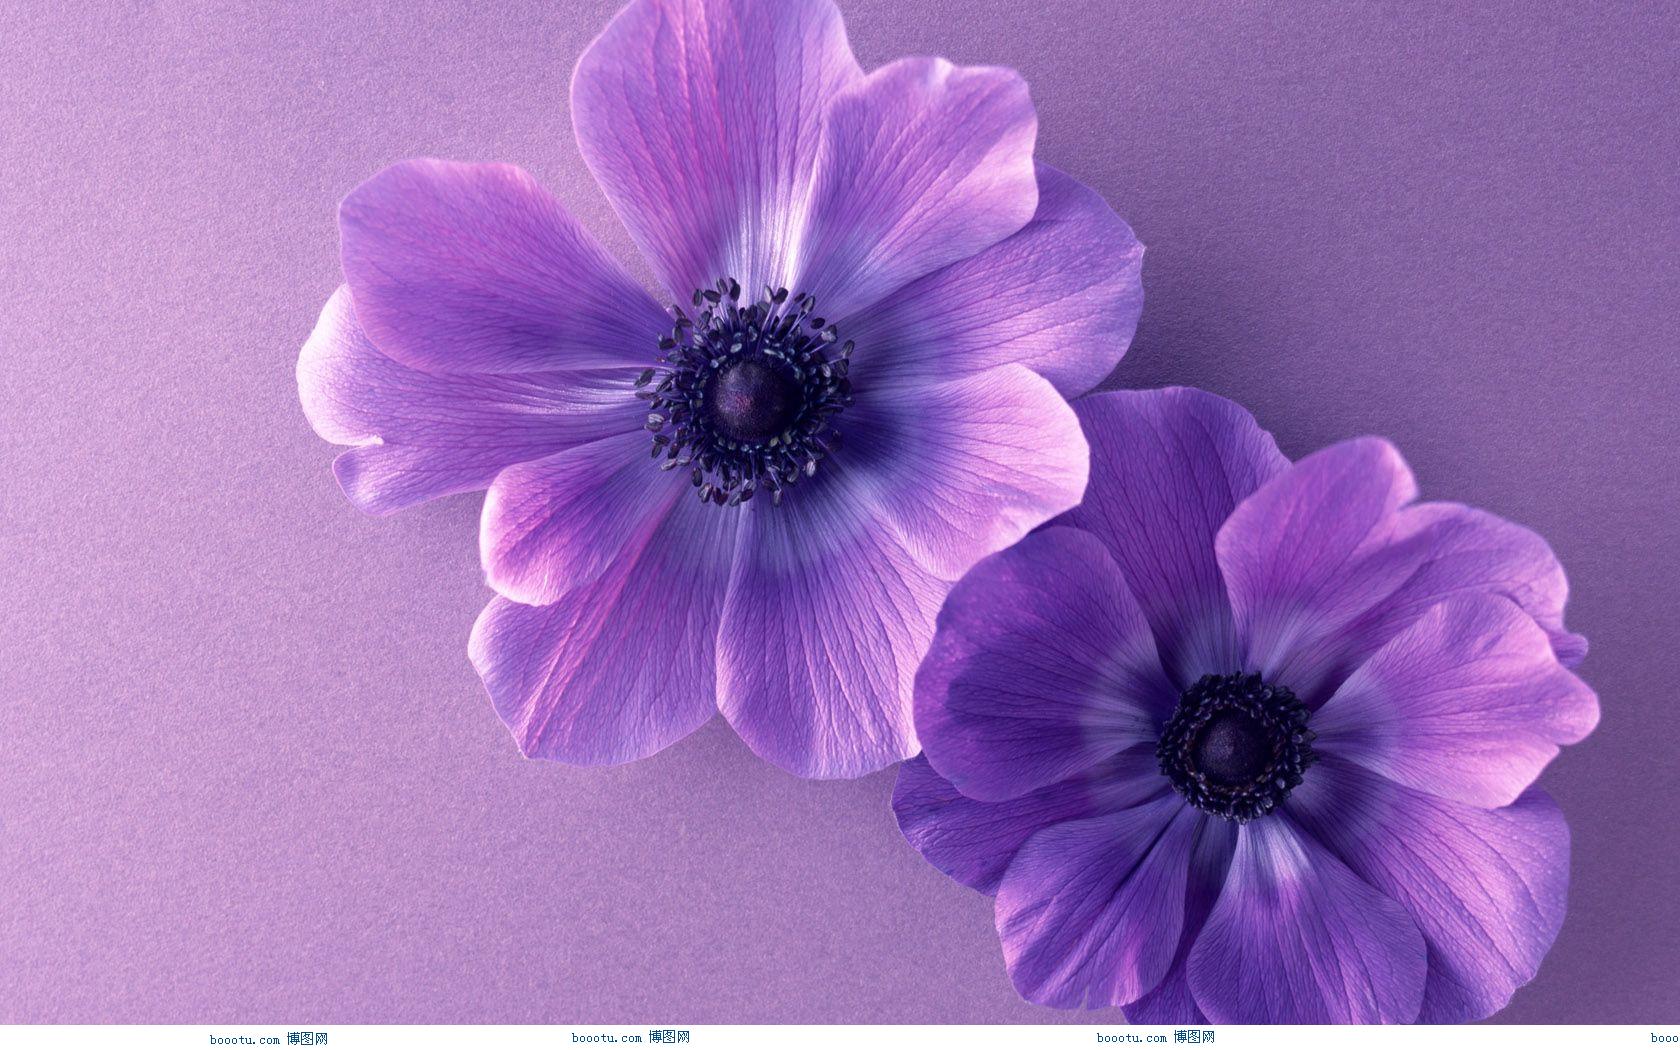 Wallpaper Cute Pictures Of Scenery Flower Dawenlodr Nice